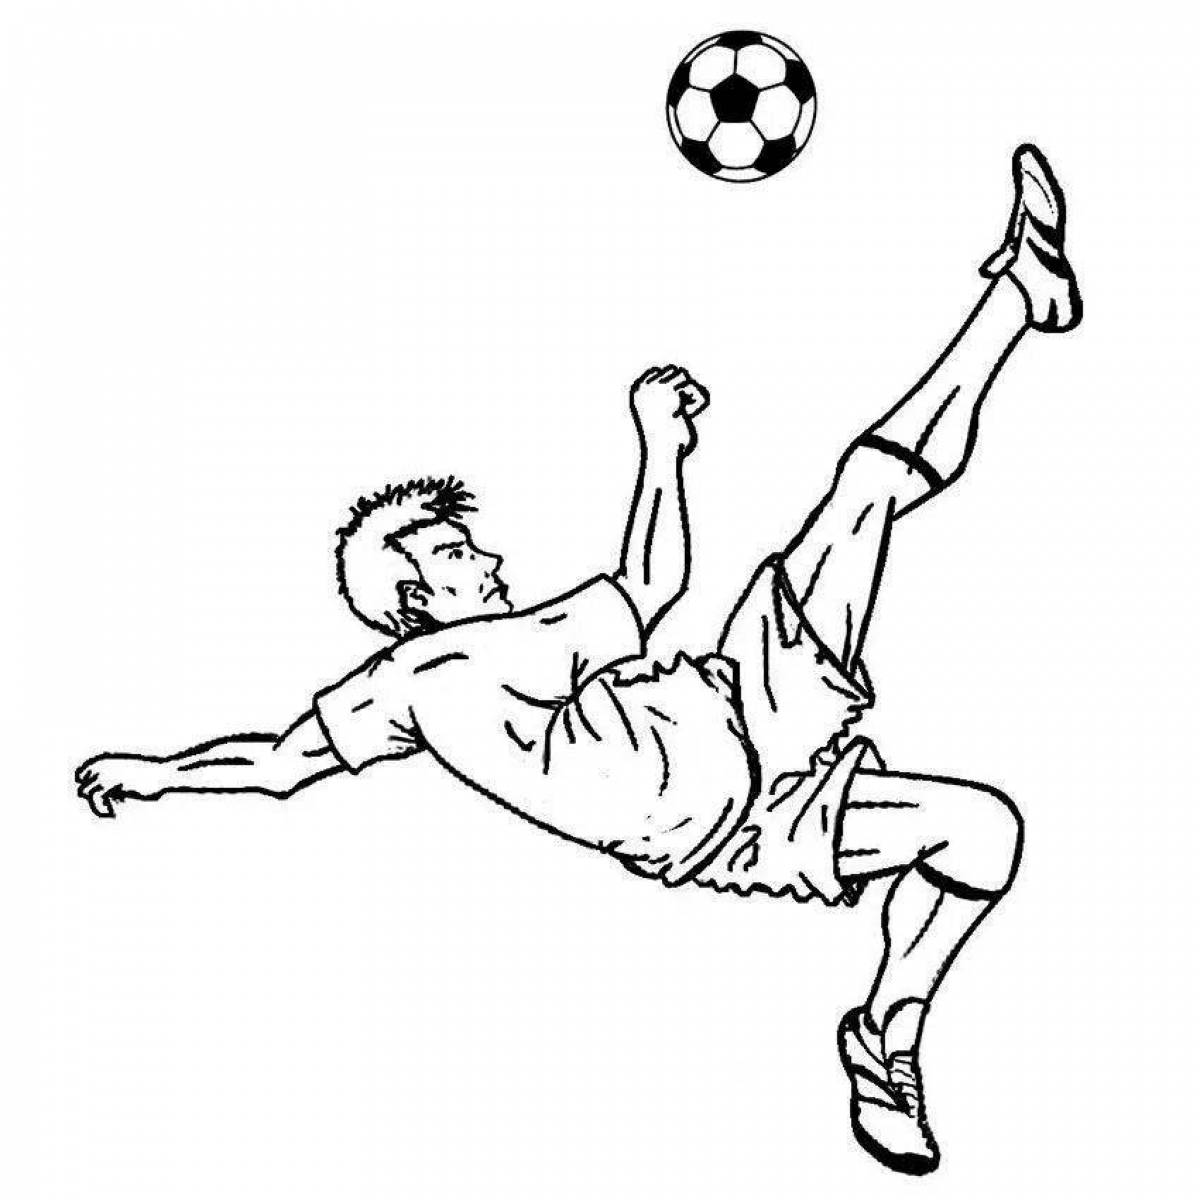 Coloring page bright football